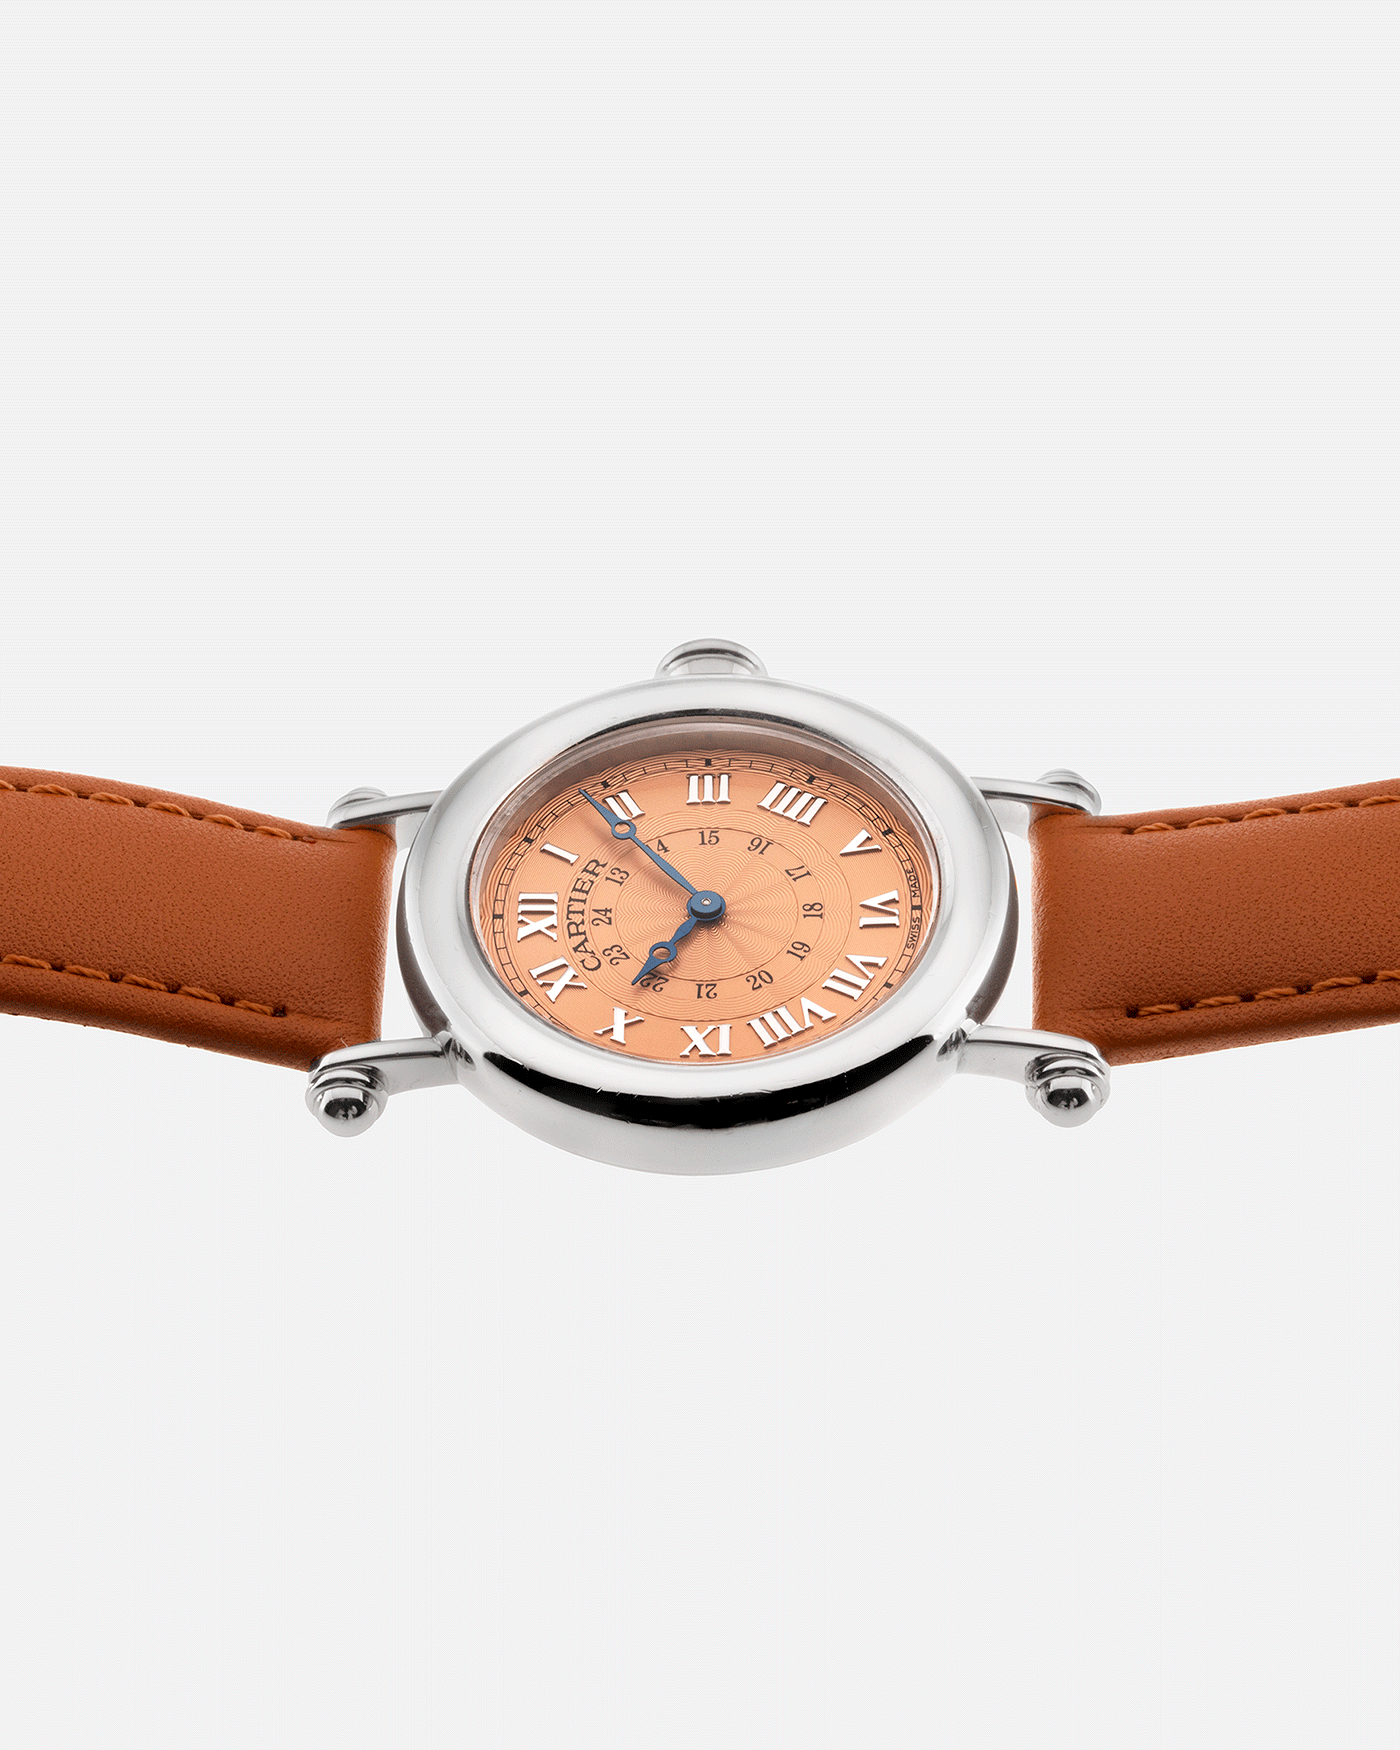 Brand: Cartier Year: 1990’s Model: Diabolo Salmon LE 50 Pieces Reference:1462 Material: Platinum Movement: Manually Wound Cartier Cal. 9P2 Case Diameter: 32mm Strap: Chestnut Carter Strap with 18k White Gold Deployant